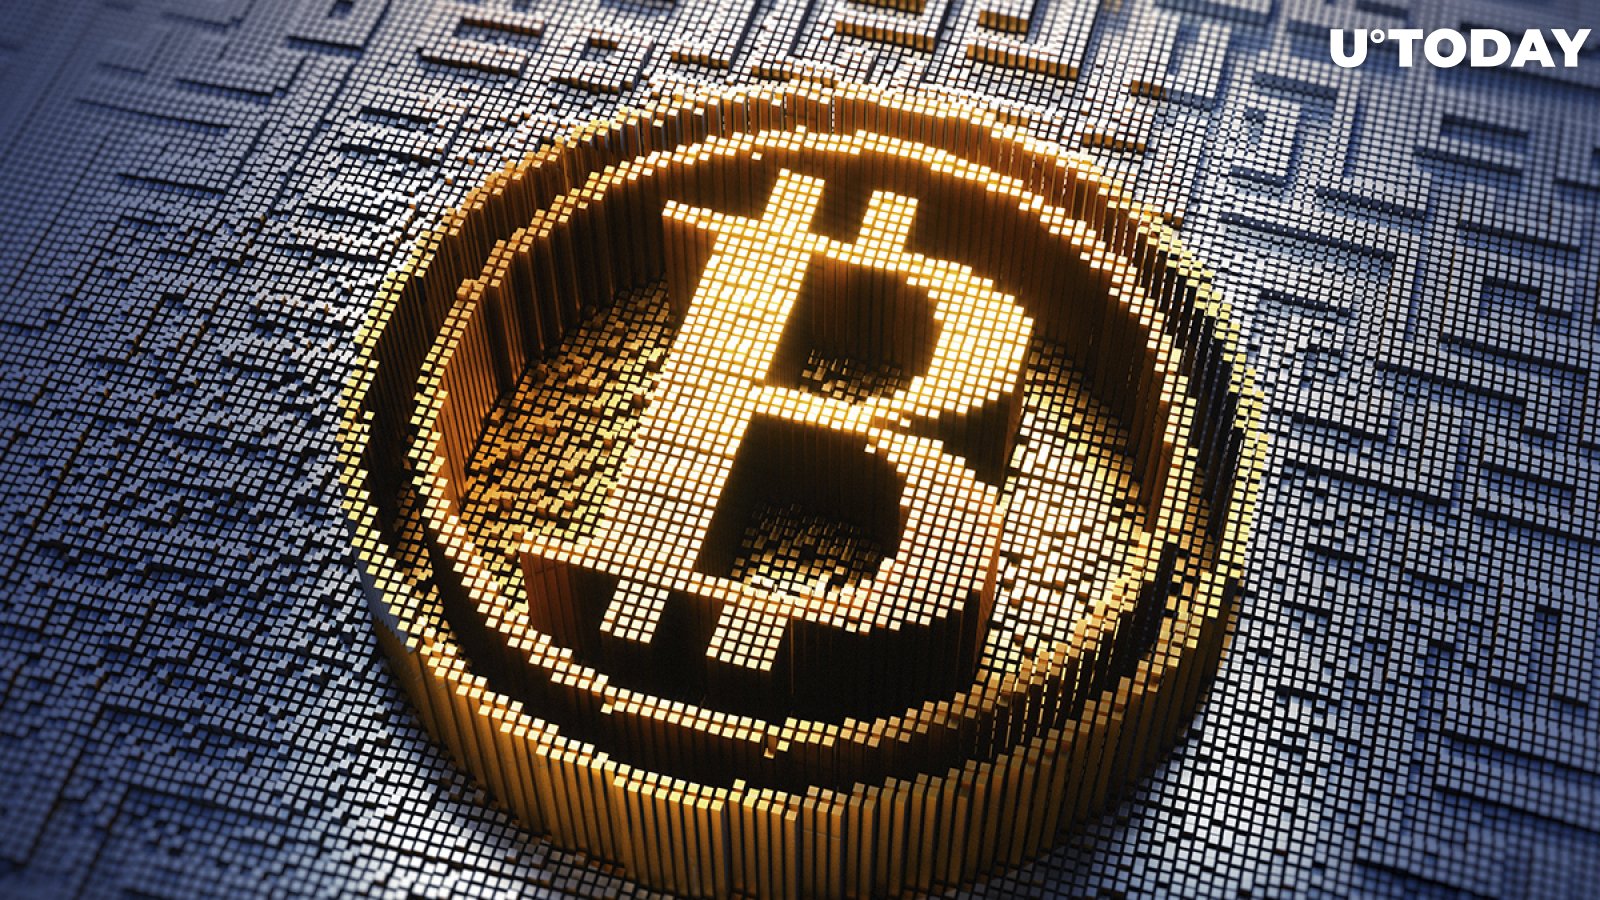 Bitcoin Skyrockets to $41,000, Reaches New All-Time High